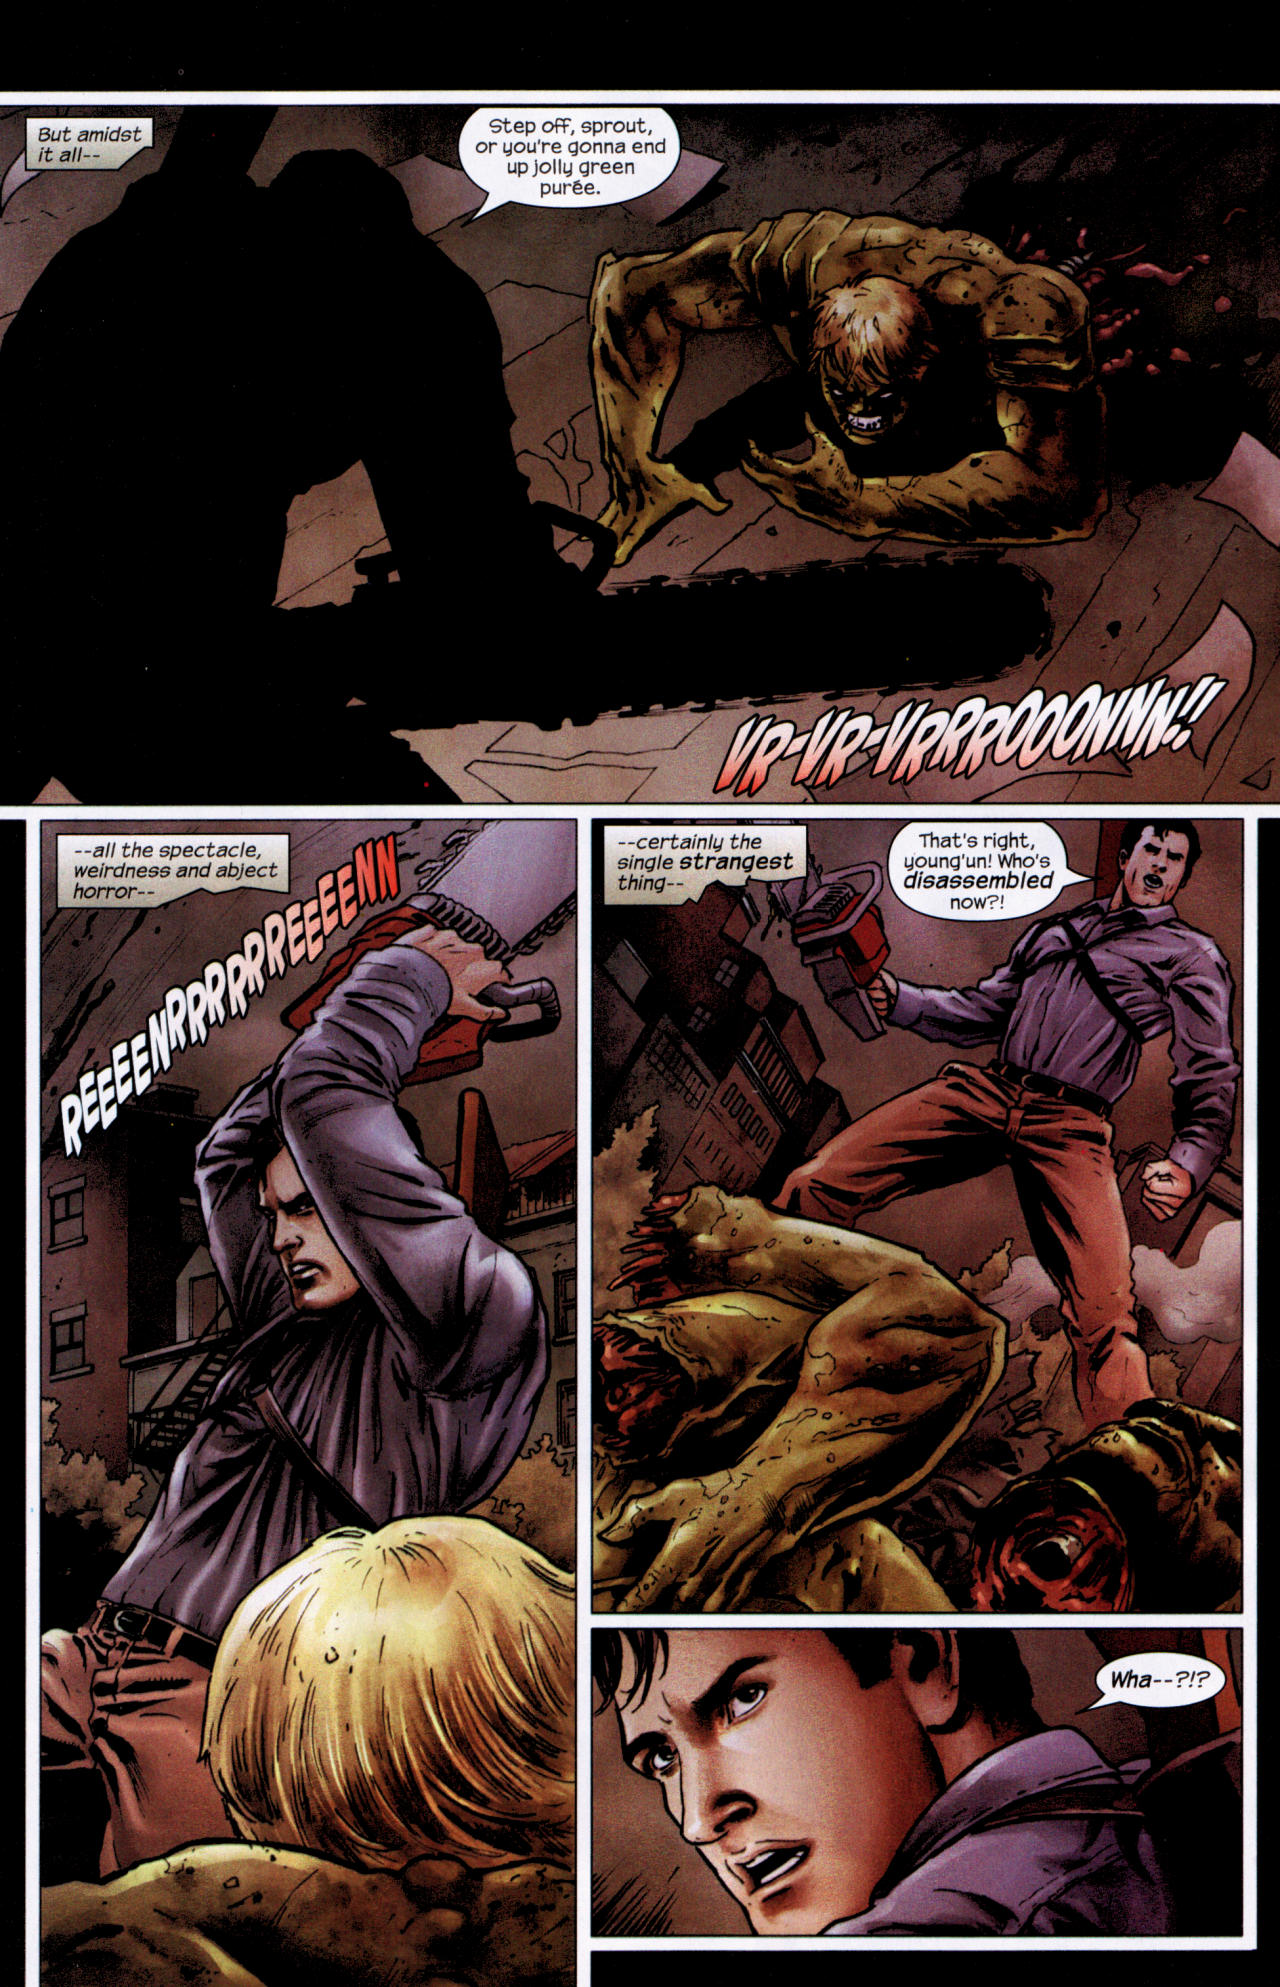 Marvel Zombies vs. Army of Darkness 3 of 5